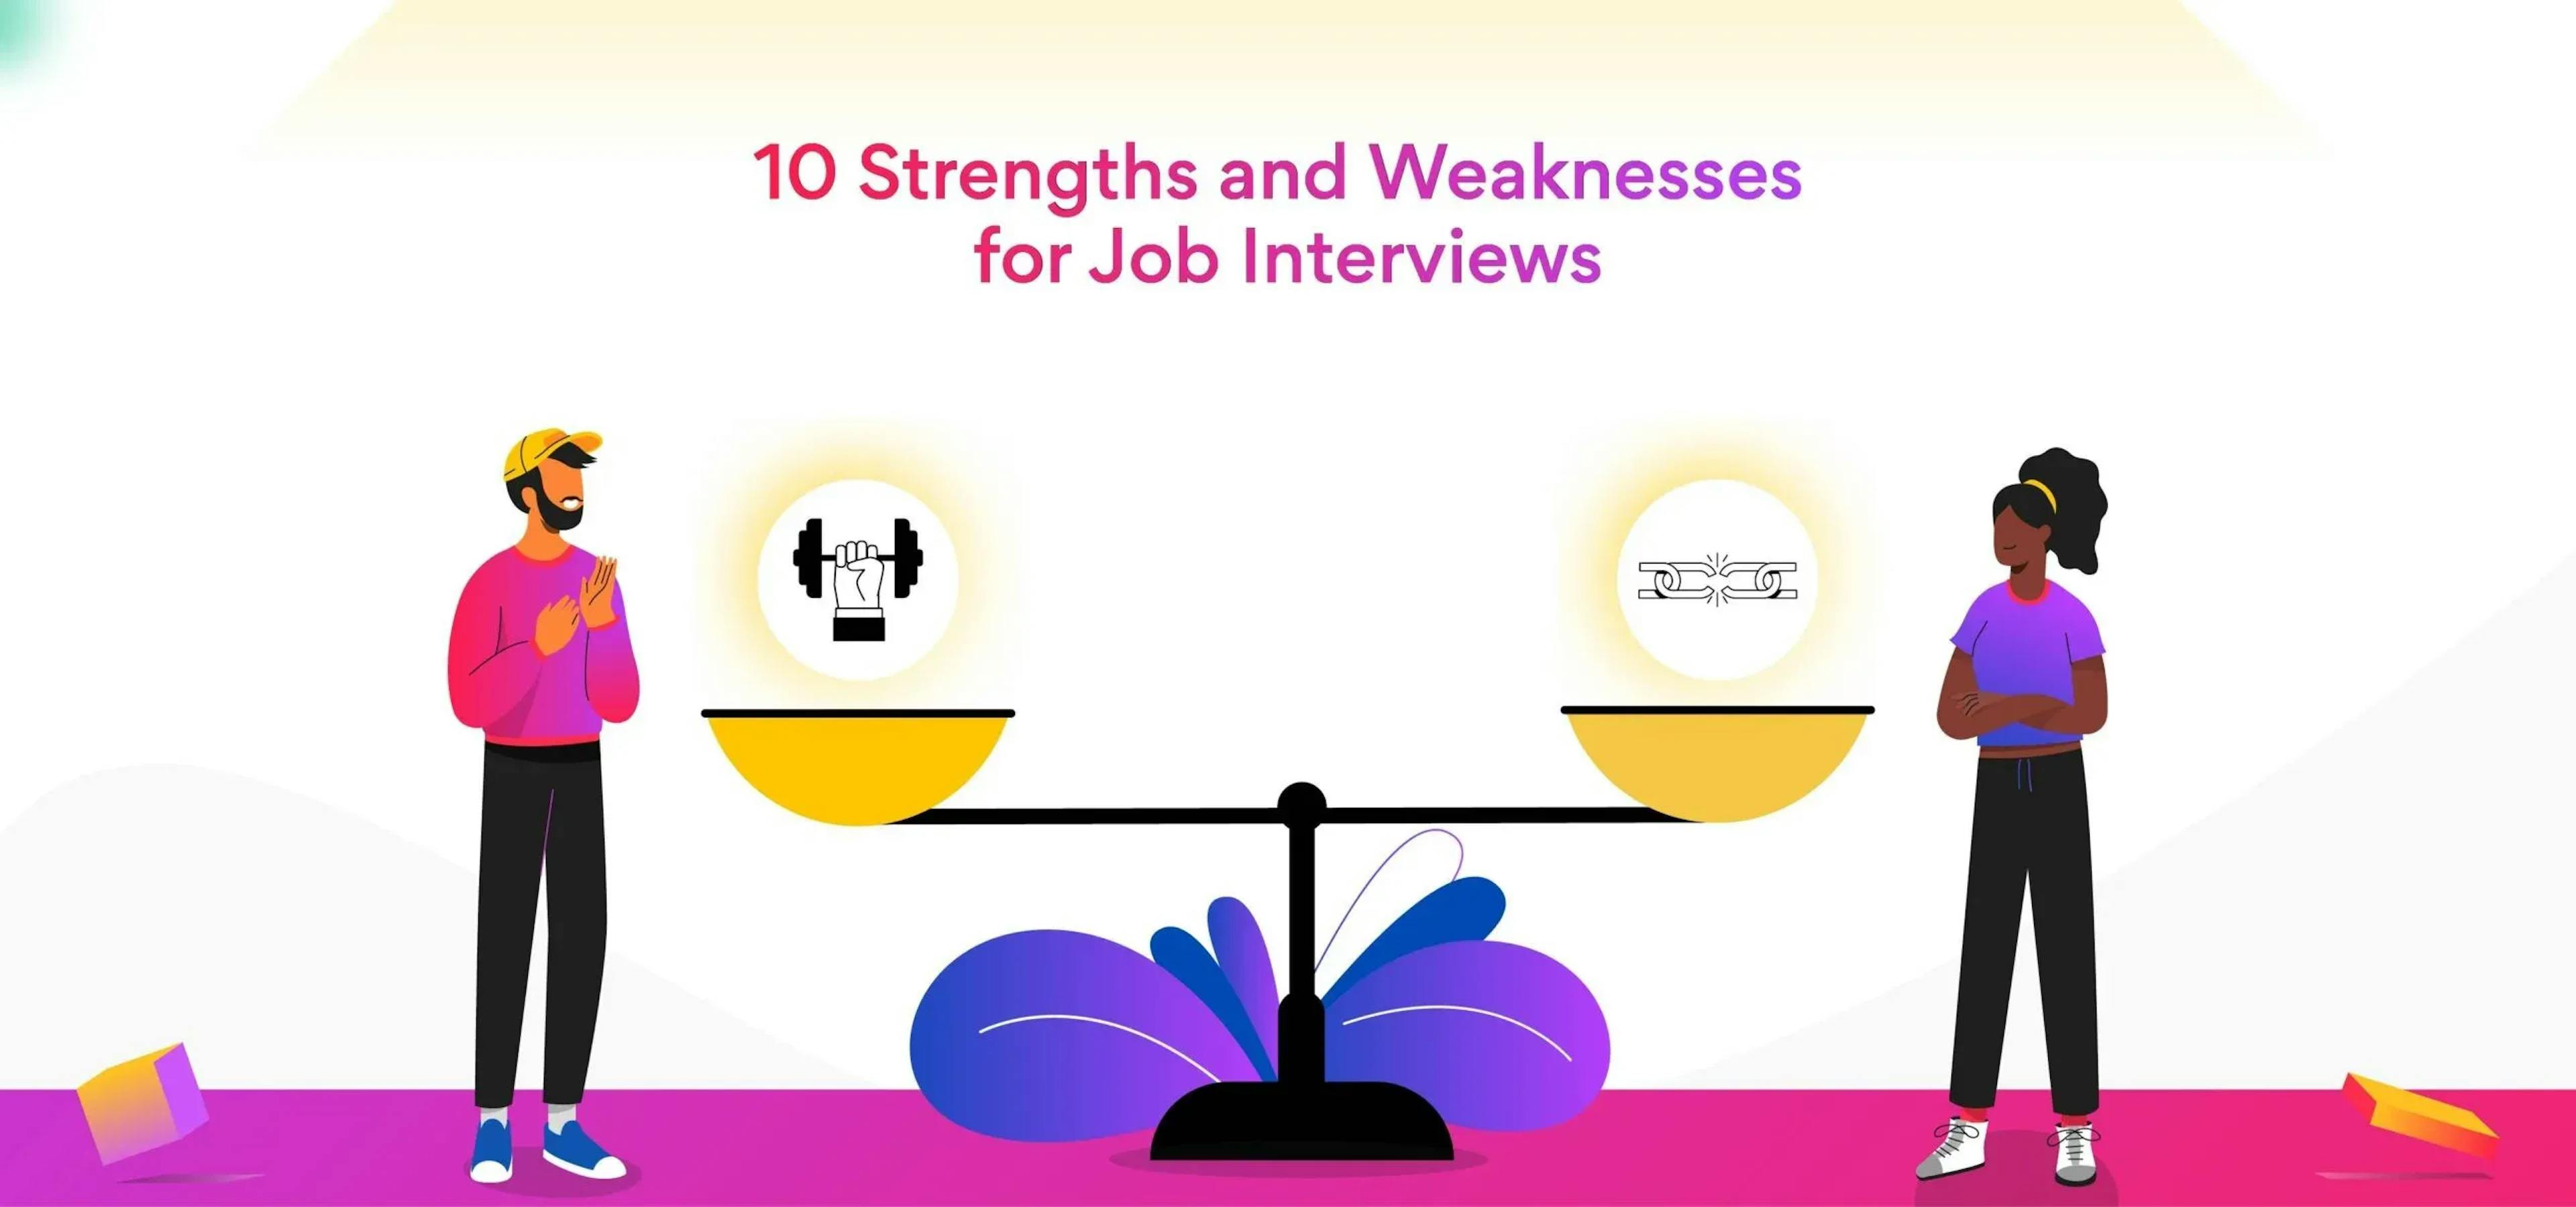 10 Strengths and Weaknesses for Job Interviews